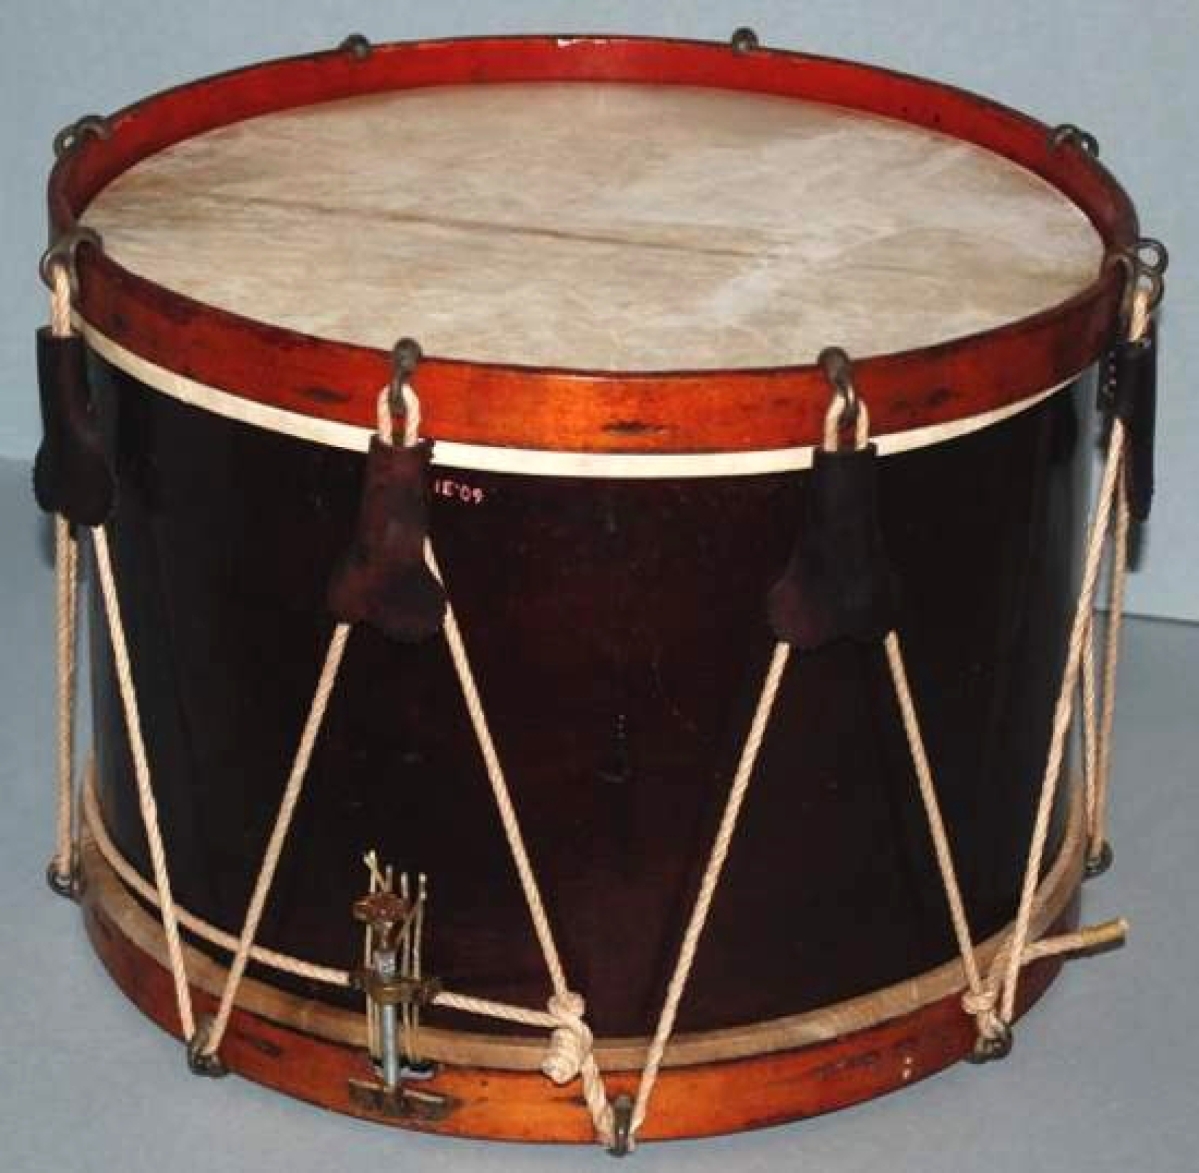 The drum was restored with new ropes, snares and goatskin drumheads, all accurate to its time period.